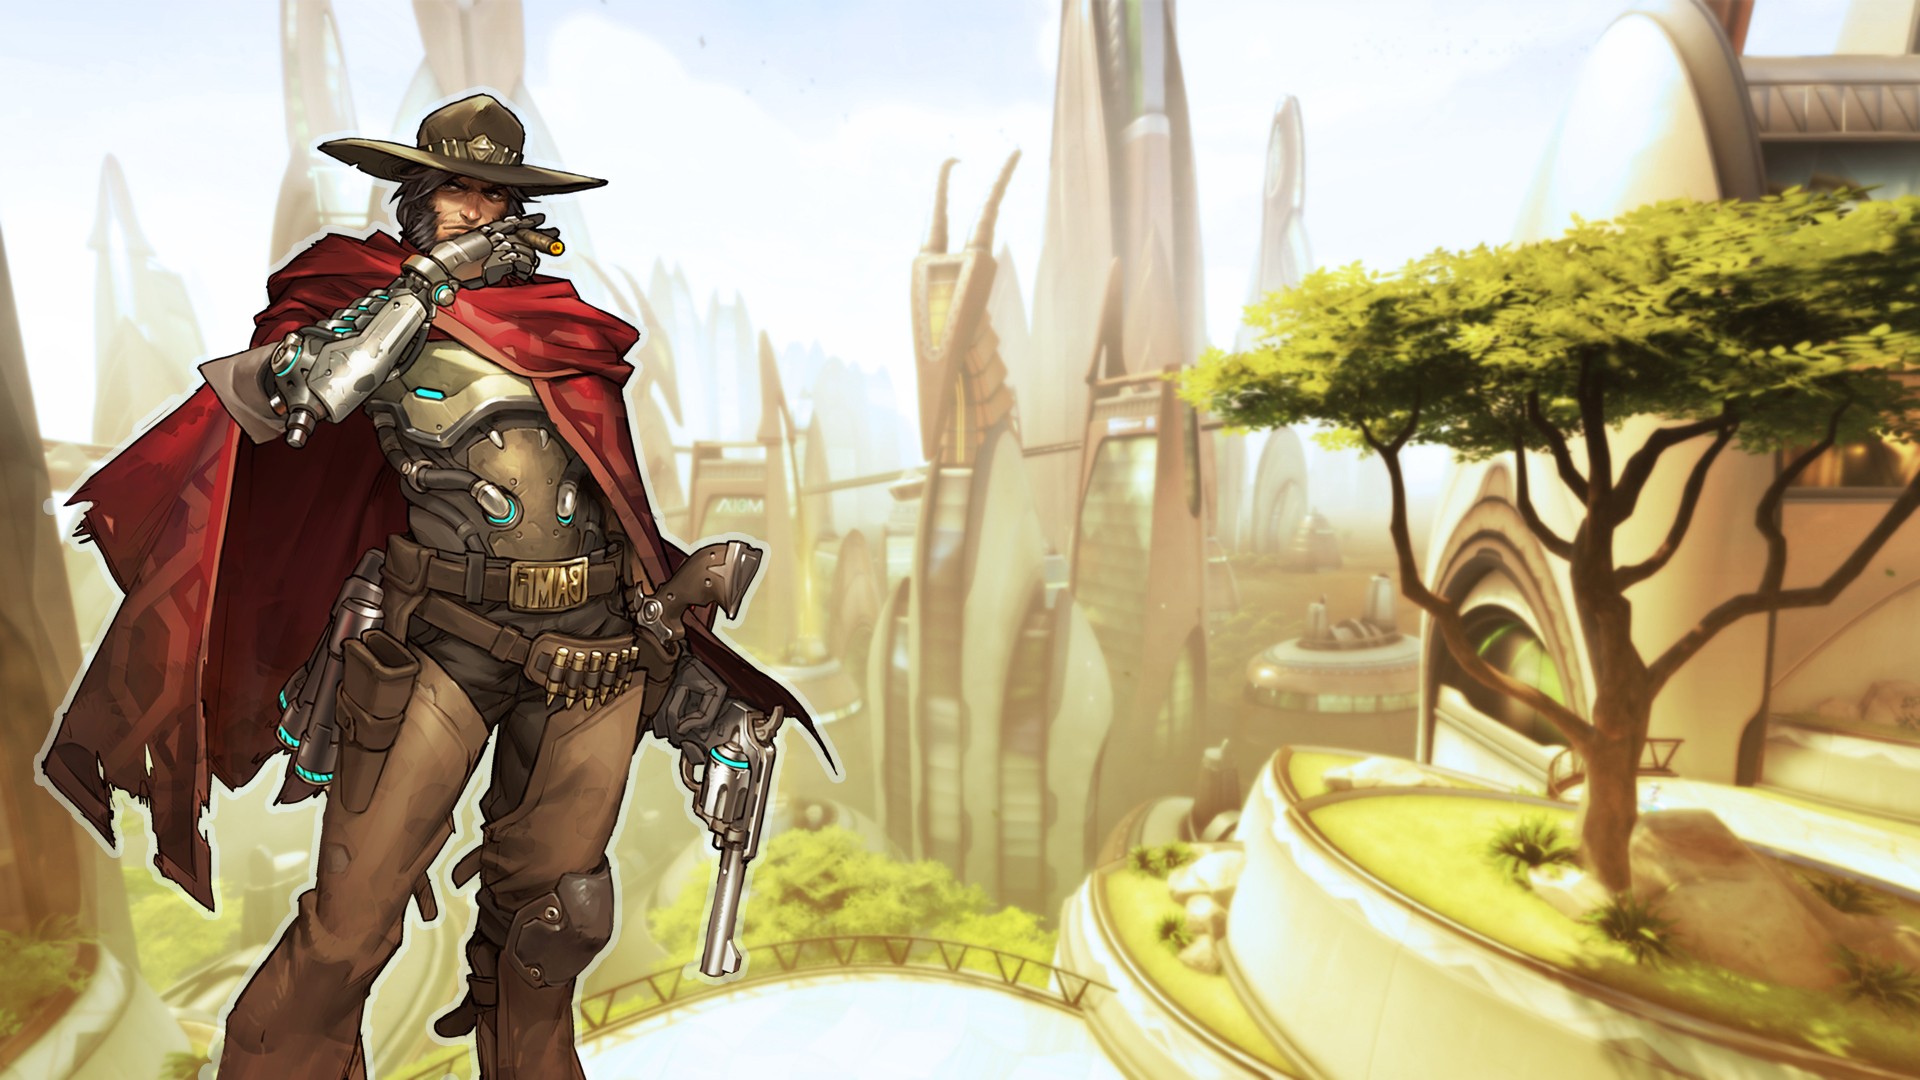 General 1920x1080 Blizzard Entertainment Overwatch video games livewirehd (Author) McCree (Overwatch) PC gaming video game men video game characters